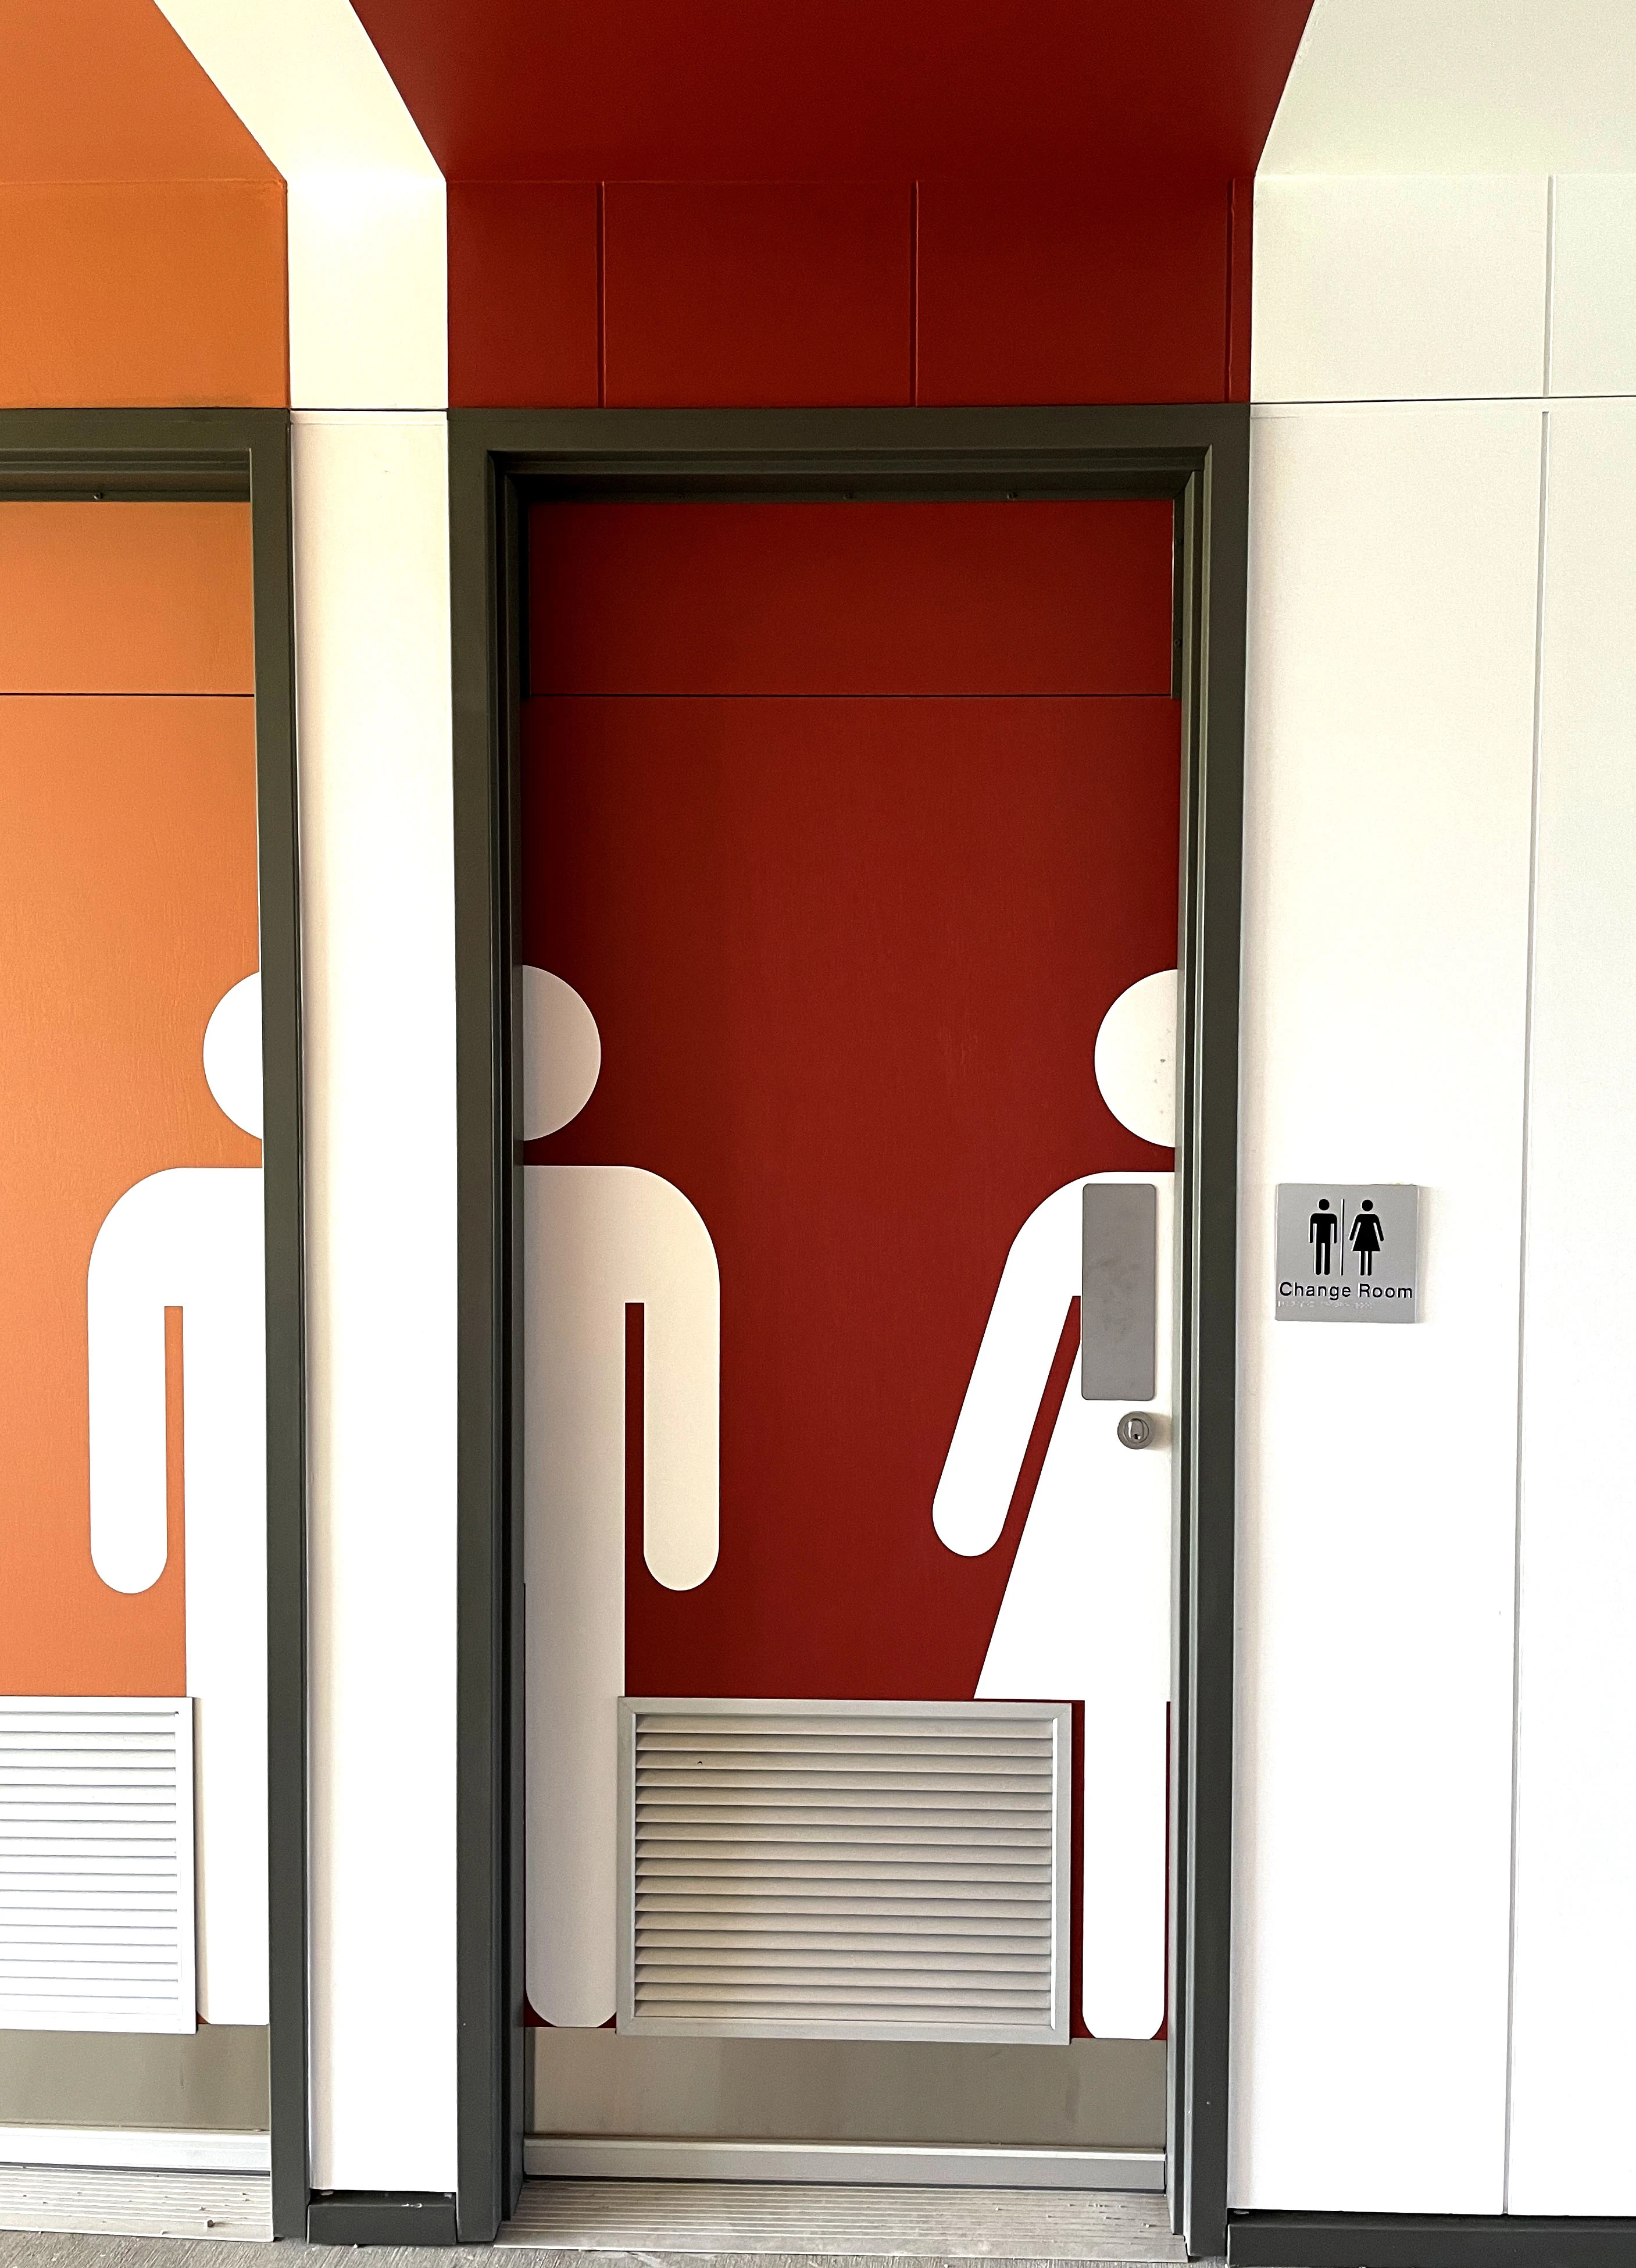 Orange and maroon doors to joint mens and womens change rooms.